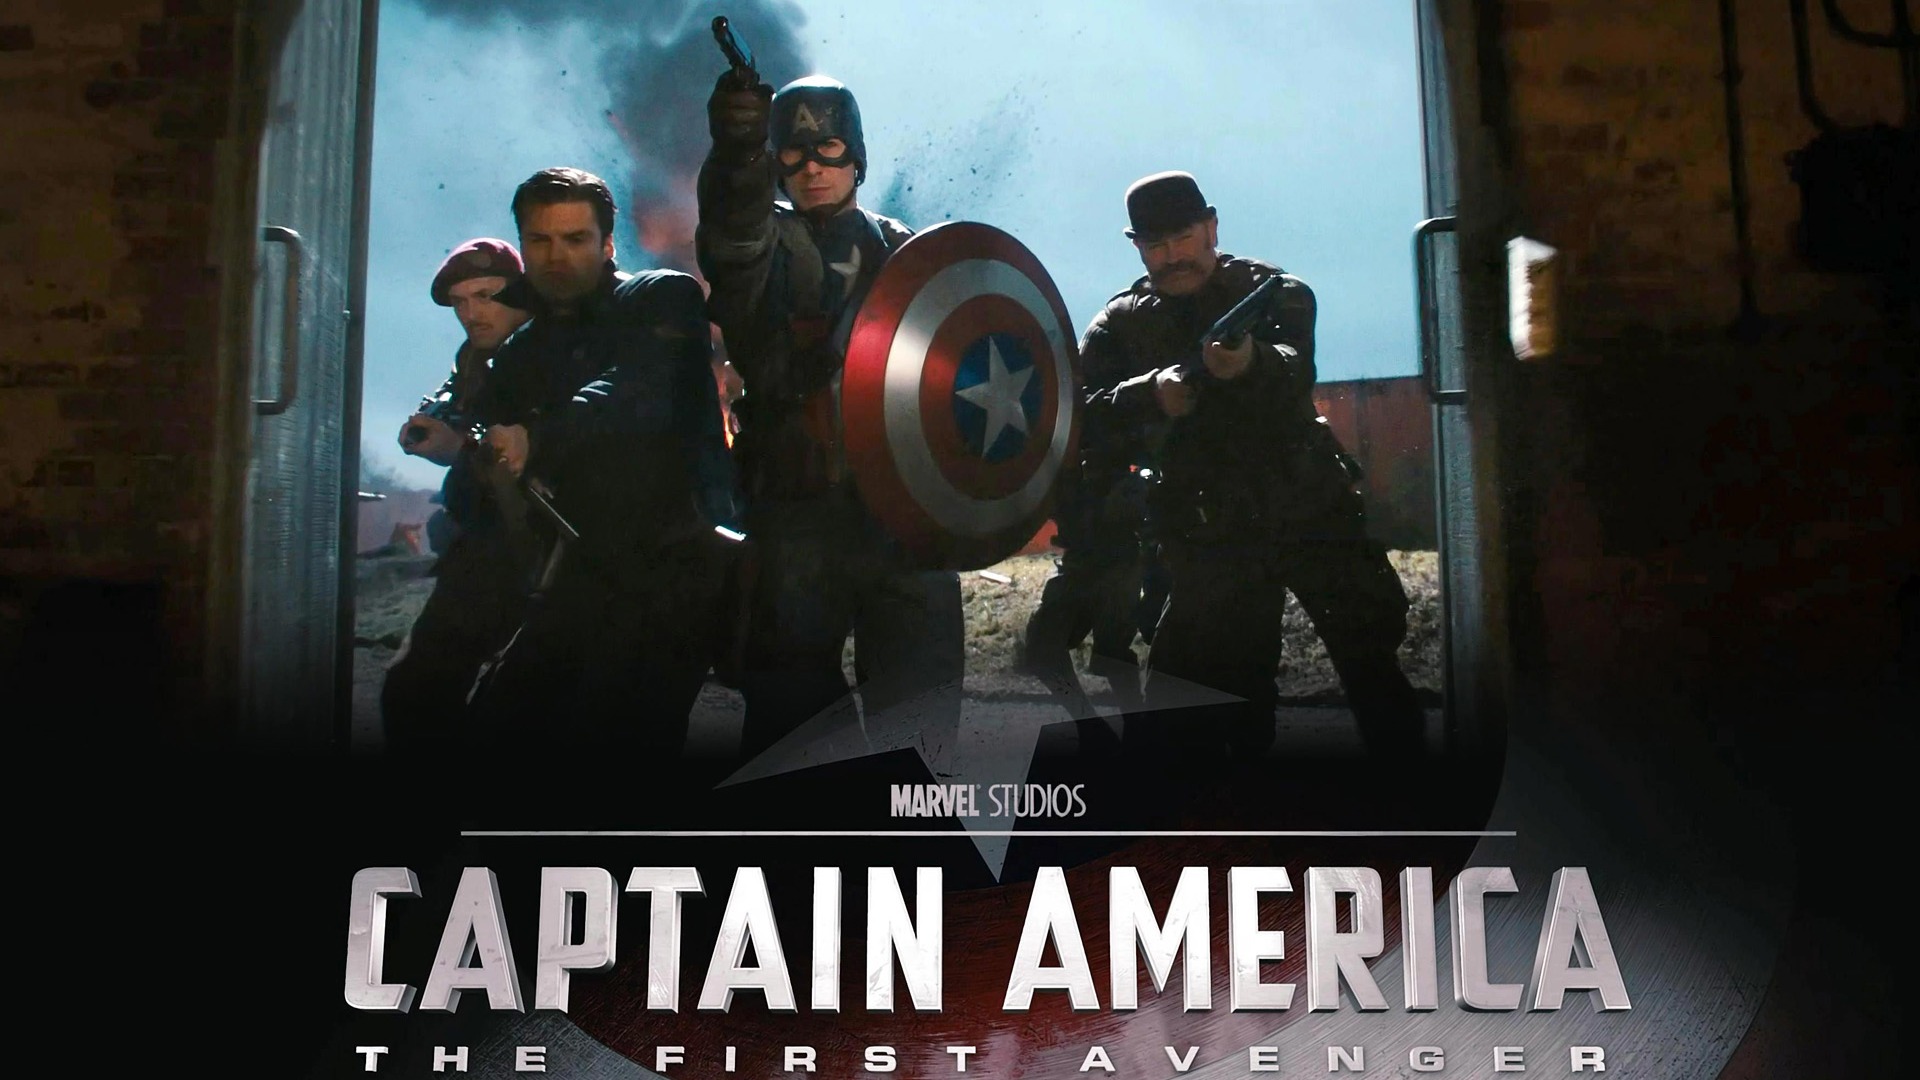 Captain America: The First Avenger wallpapers HD #9 - 1920x1080